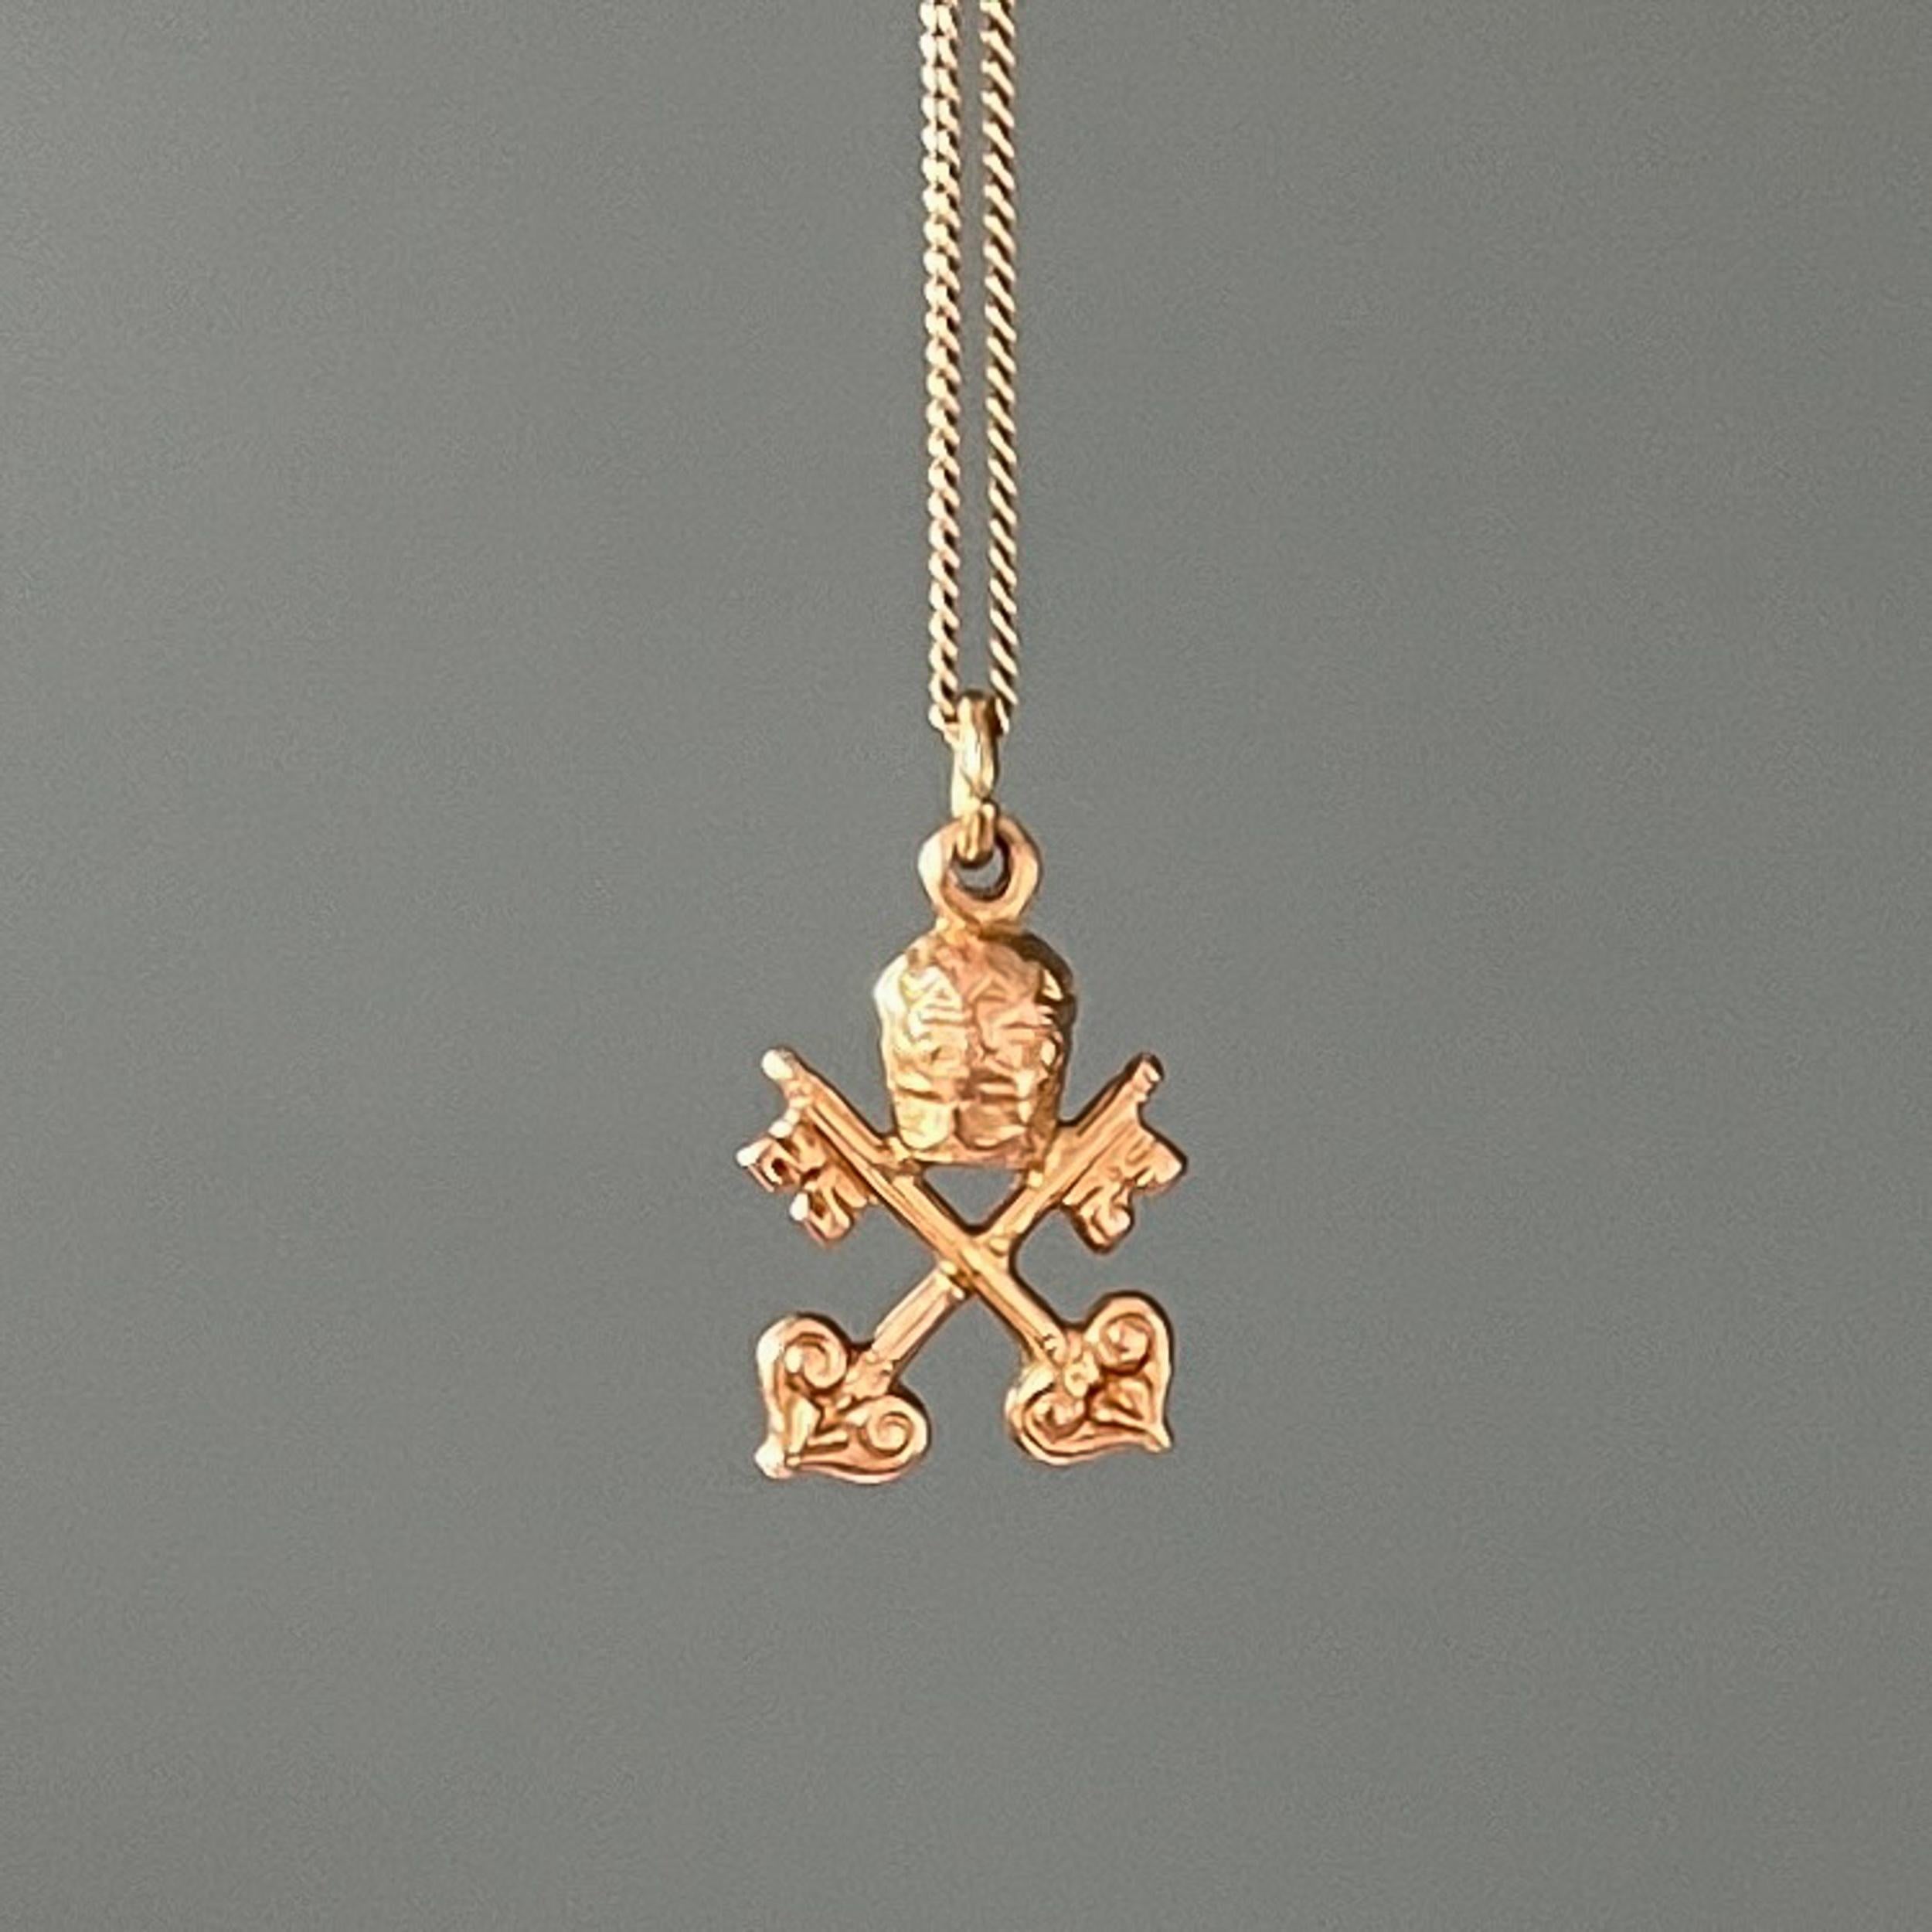 A vintage 18 karat yellow gold keys of the kingdom of heaven charm pendant. The charm with two keys represents the power of loosing and binding. The triple crown - the tiara - symbolizes the triple power of the Pope as 